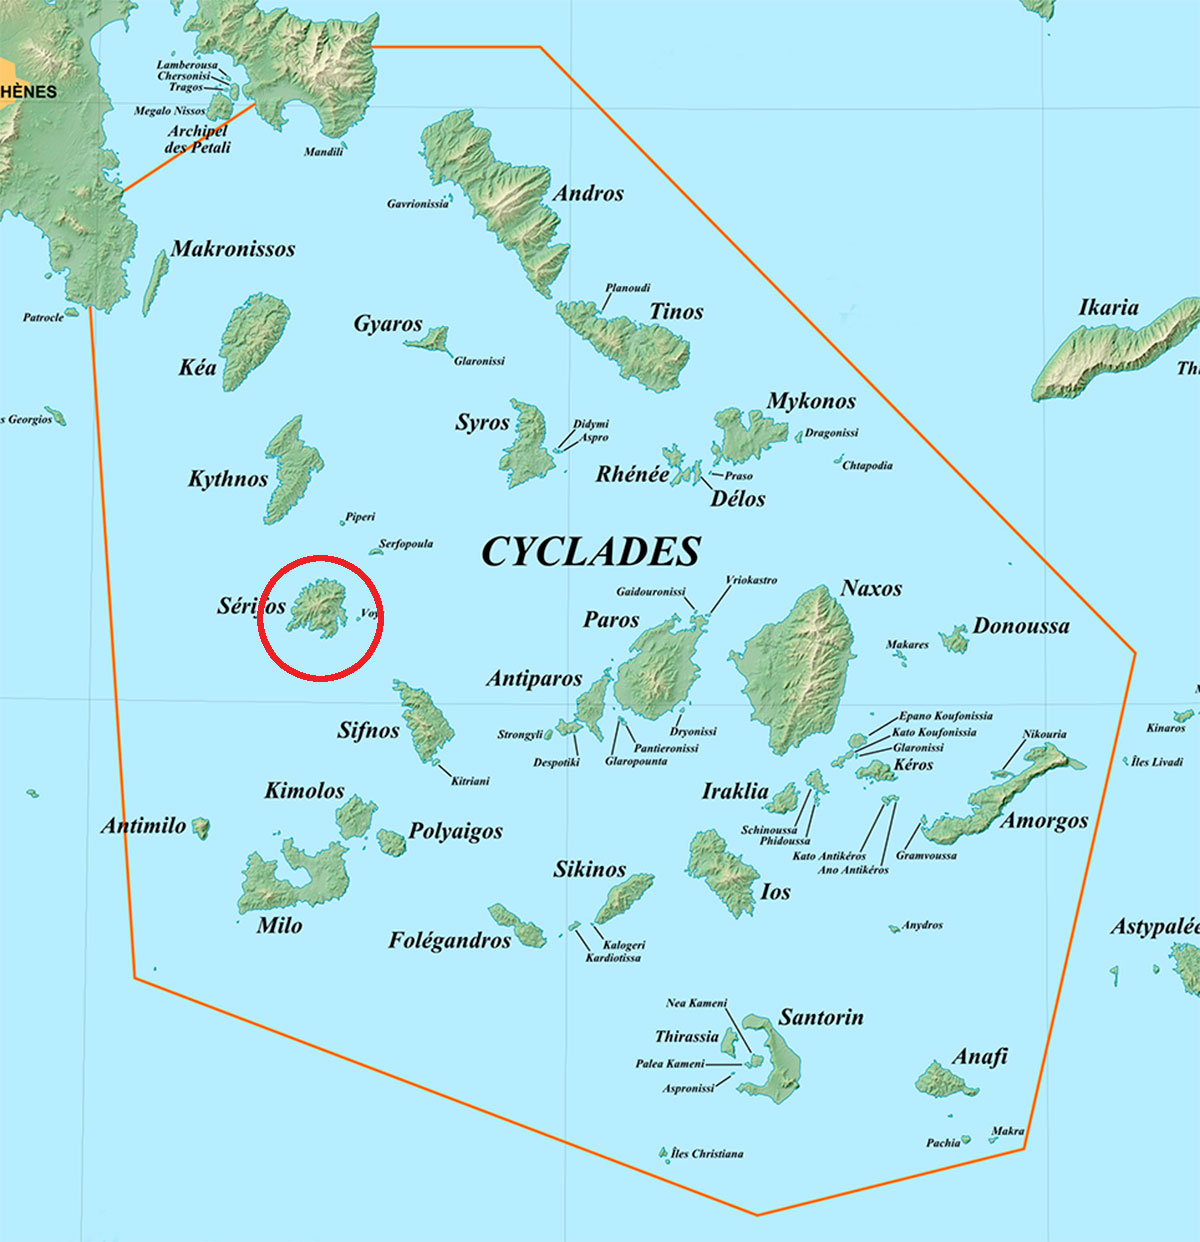 Cyclades map and the location of Serifos